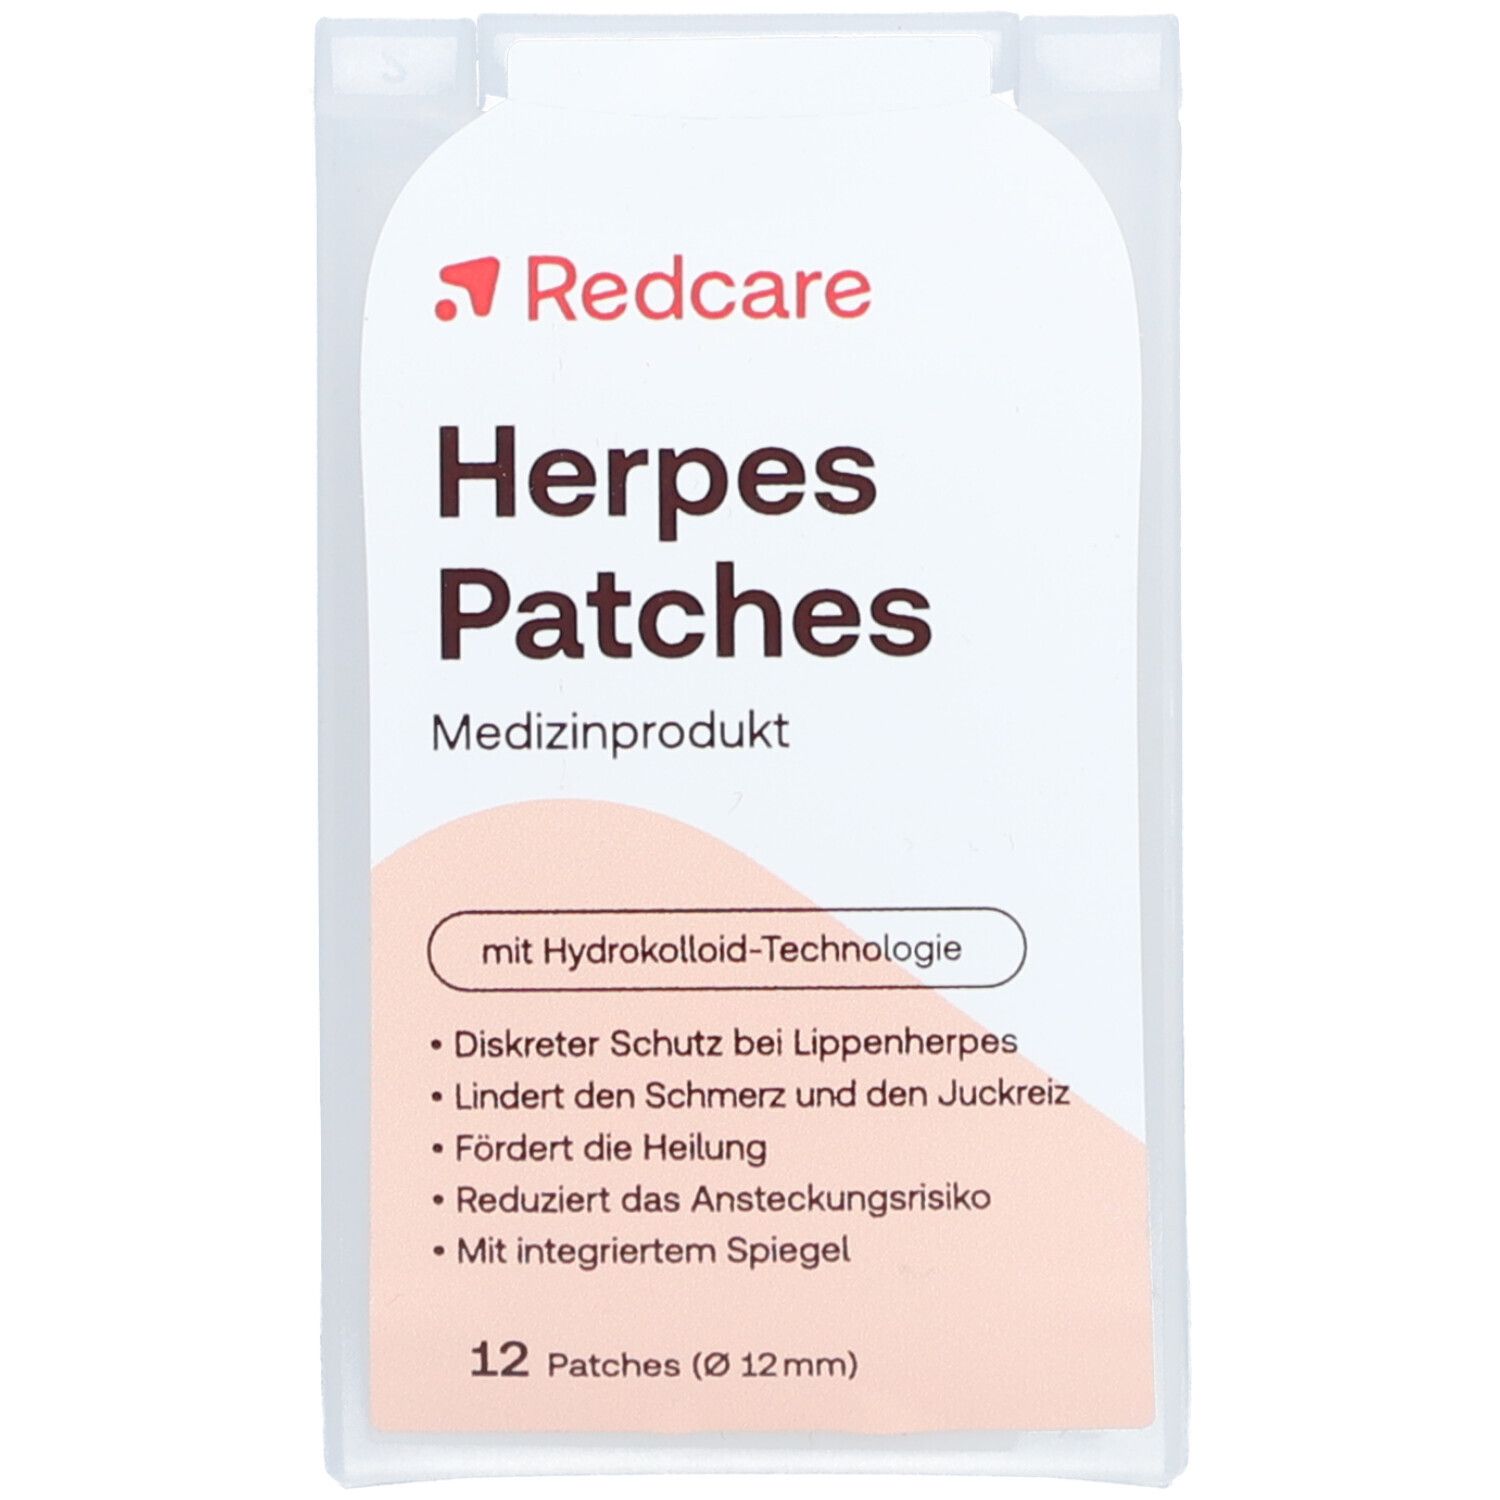 Redcare Herpes Patches